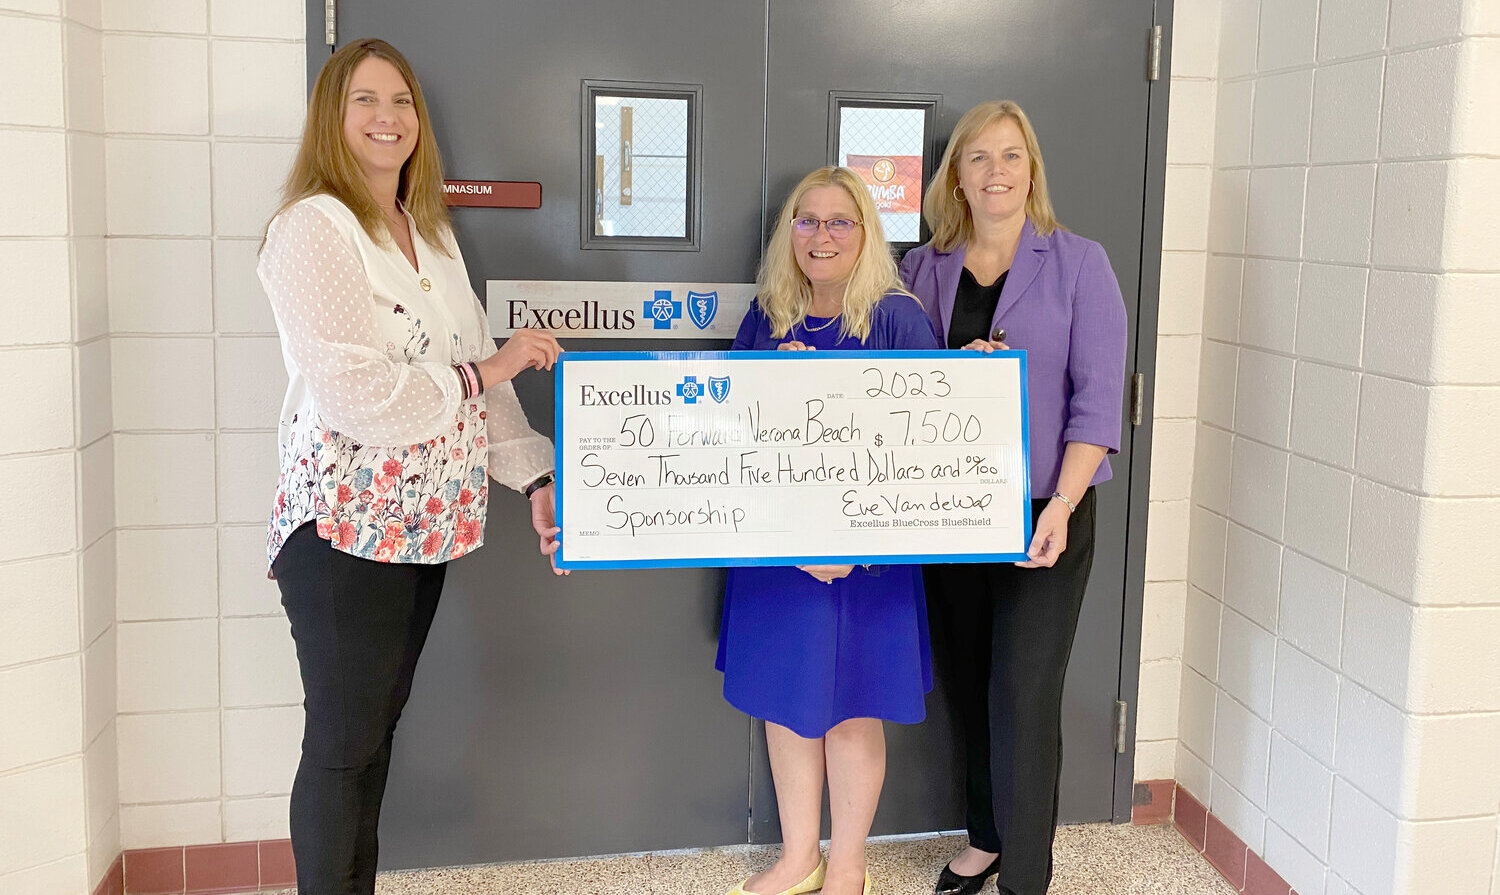 Officials from 50 Forward Mohawk Valley and Excellus BlueCross BlueShield pose with a ceremonial check for $7,500, representing a grant from Excellus to support 50 Forward MV’s efforts to build health and wellness programs for older adults at its Verona Beach Center.